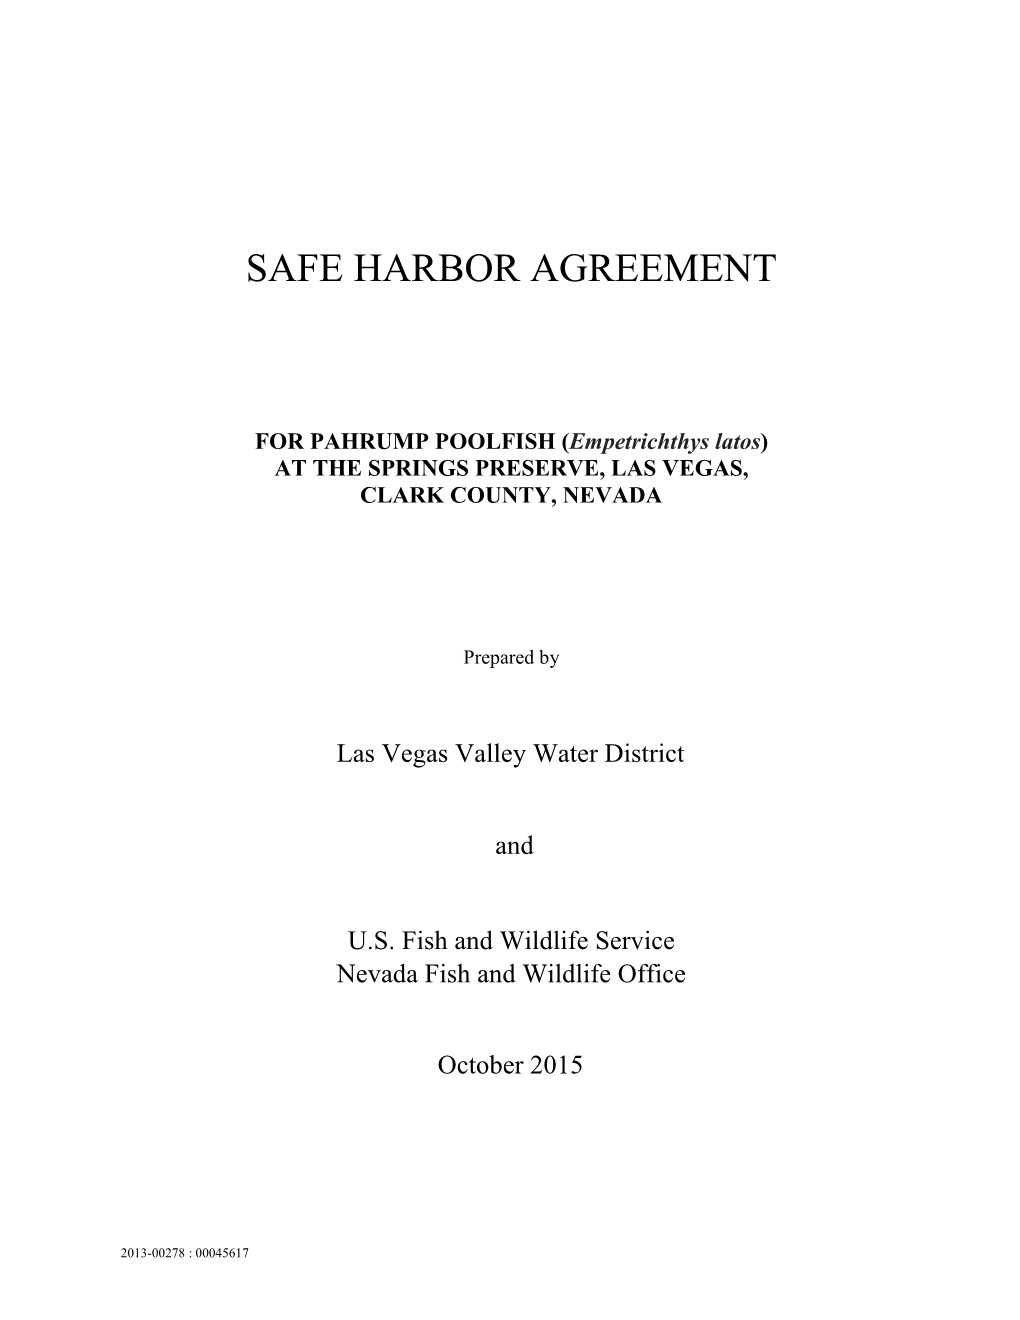 Safe Harbor Agreement for Pahrump Poolfish at the Springs Preserve